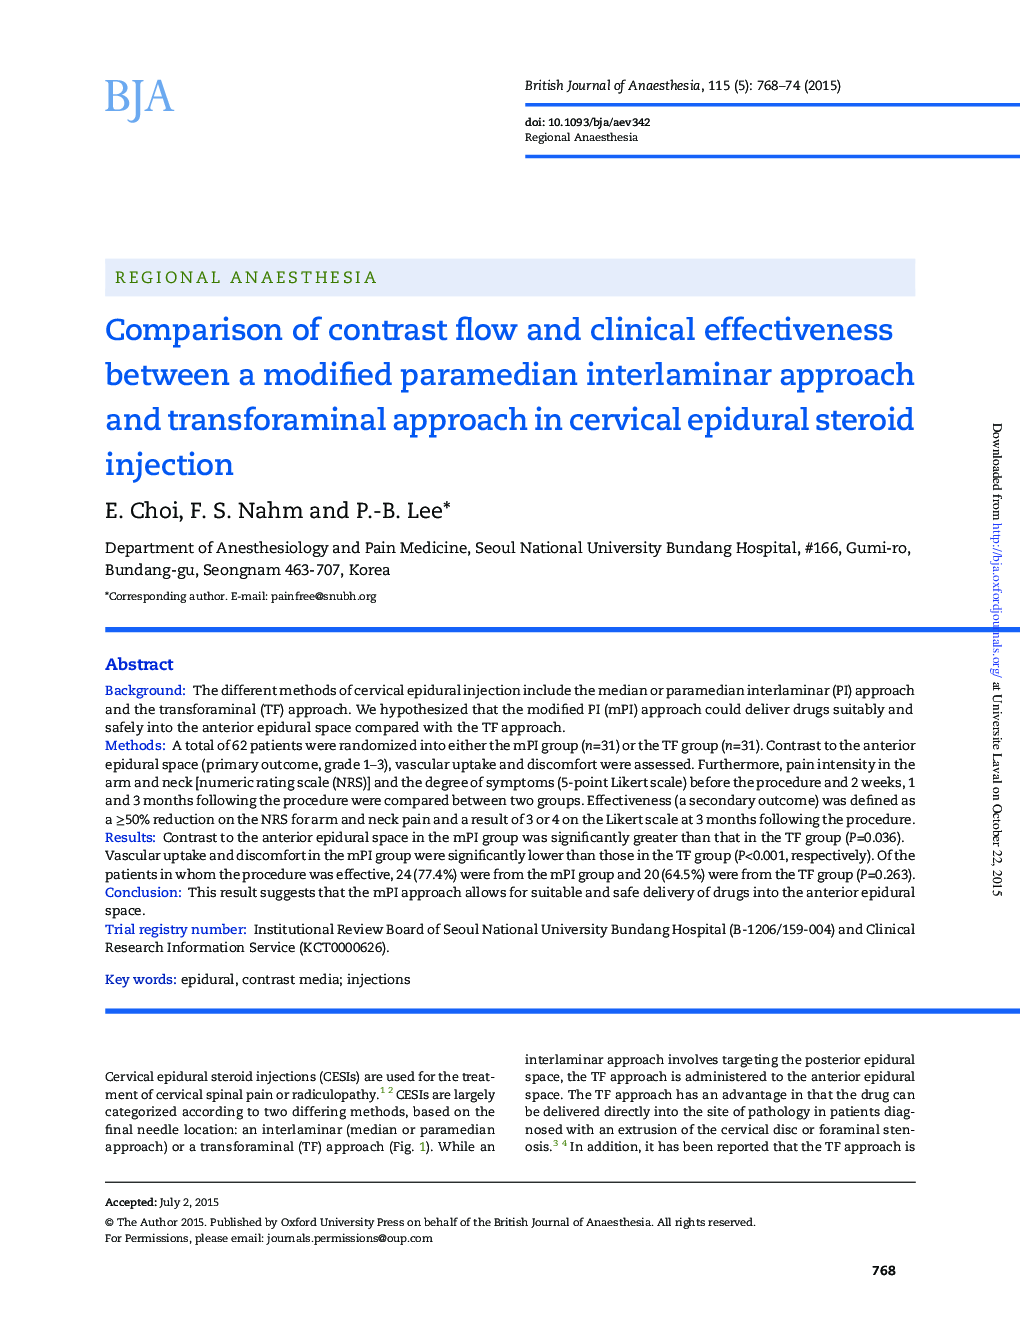 Comparison of contrast flow and clinical effectiveness between a modified paramedian interlaminar approach and transforaminal approach in cervical epidural steroid injection